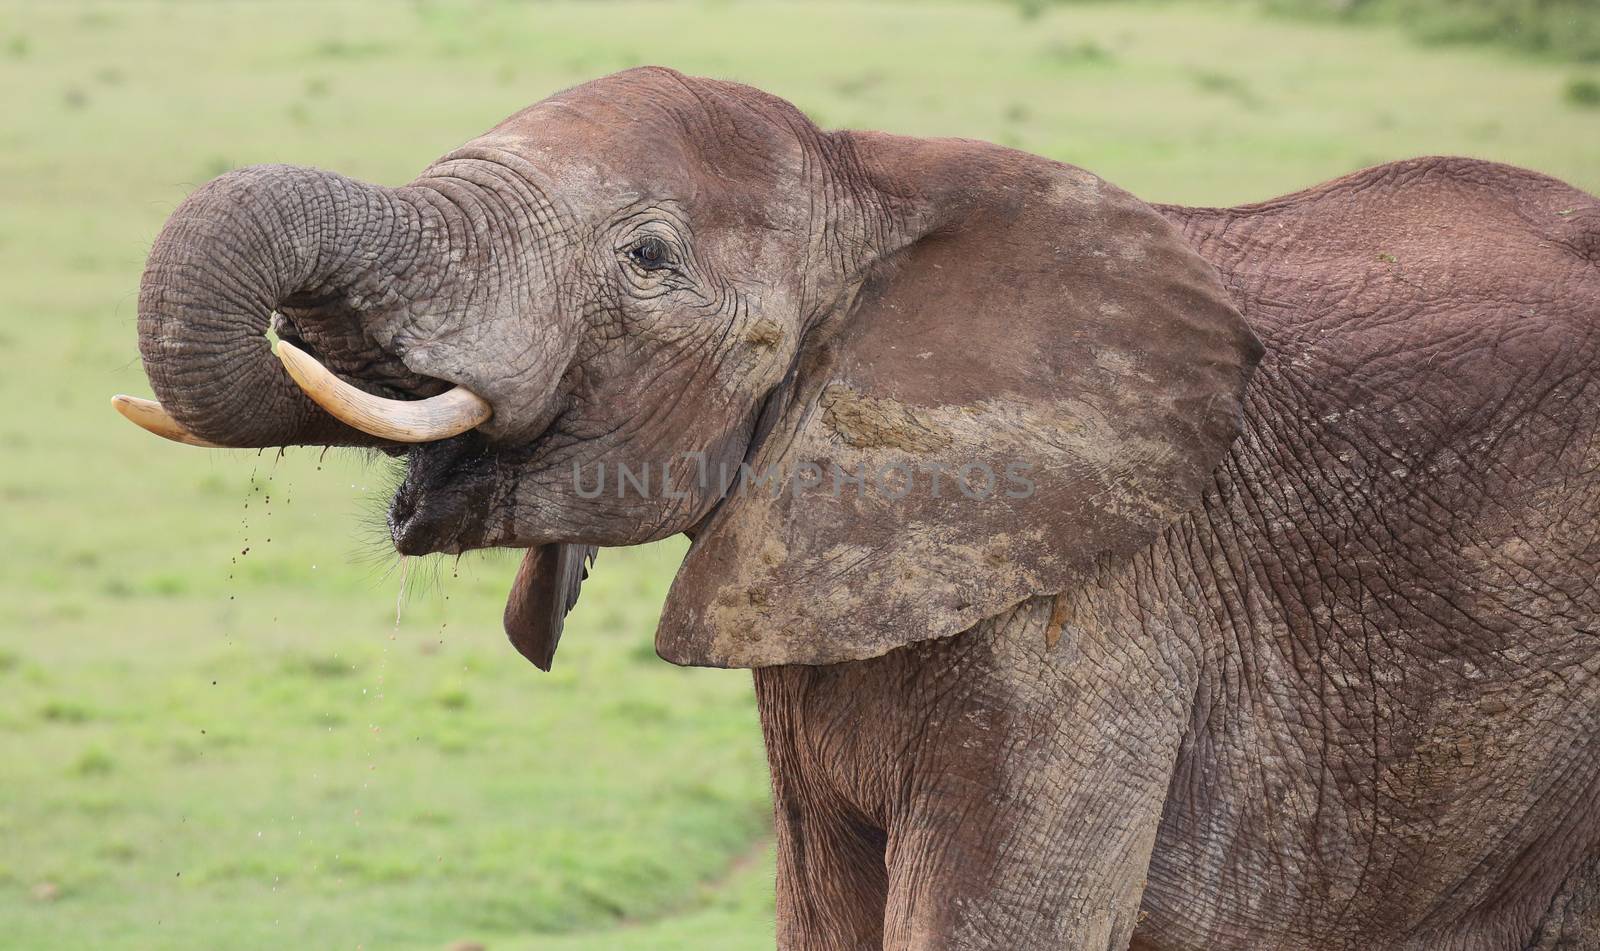 Large male African elephant with trunk extended smelling for water